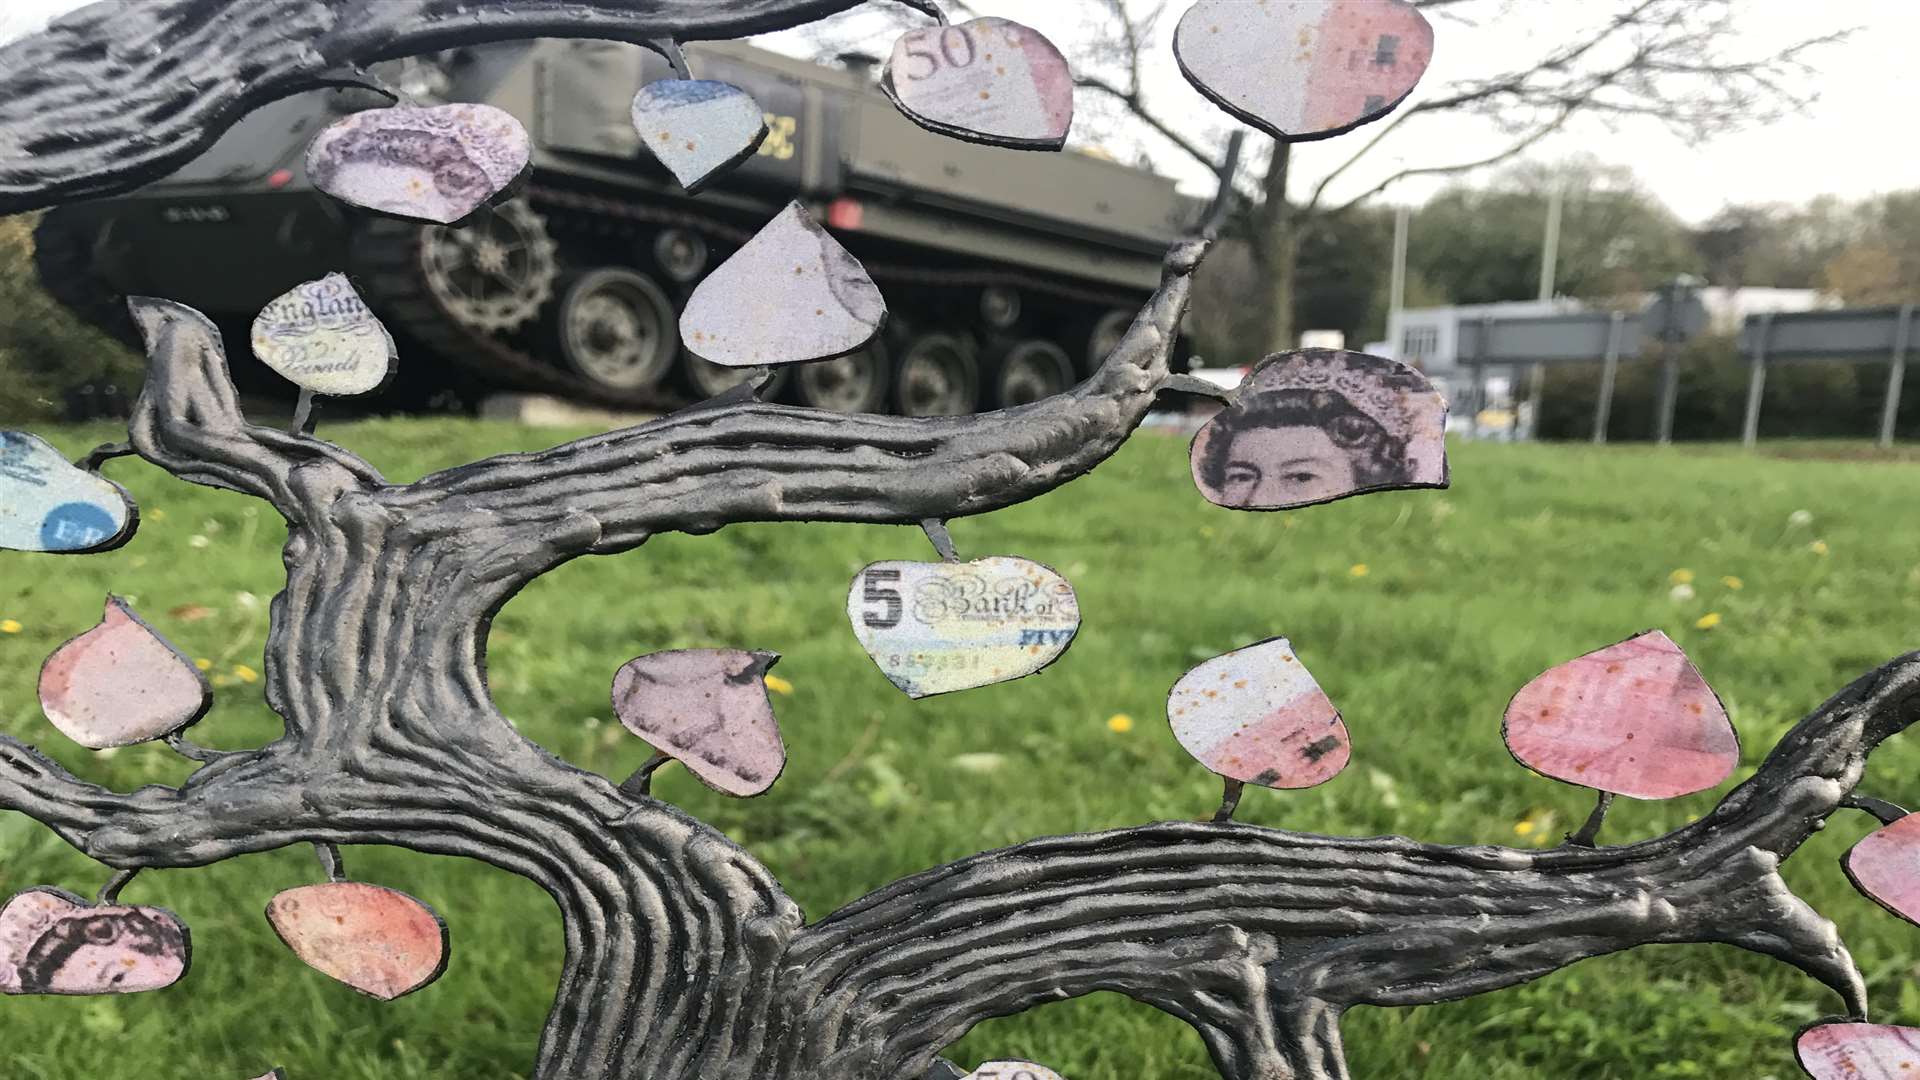 The leaves on the tree are designed to look like money